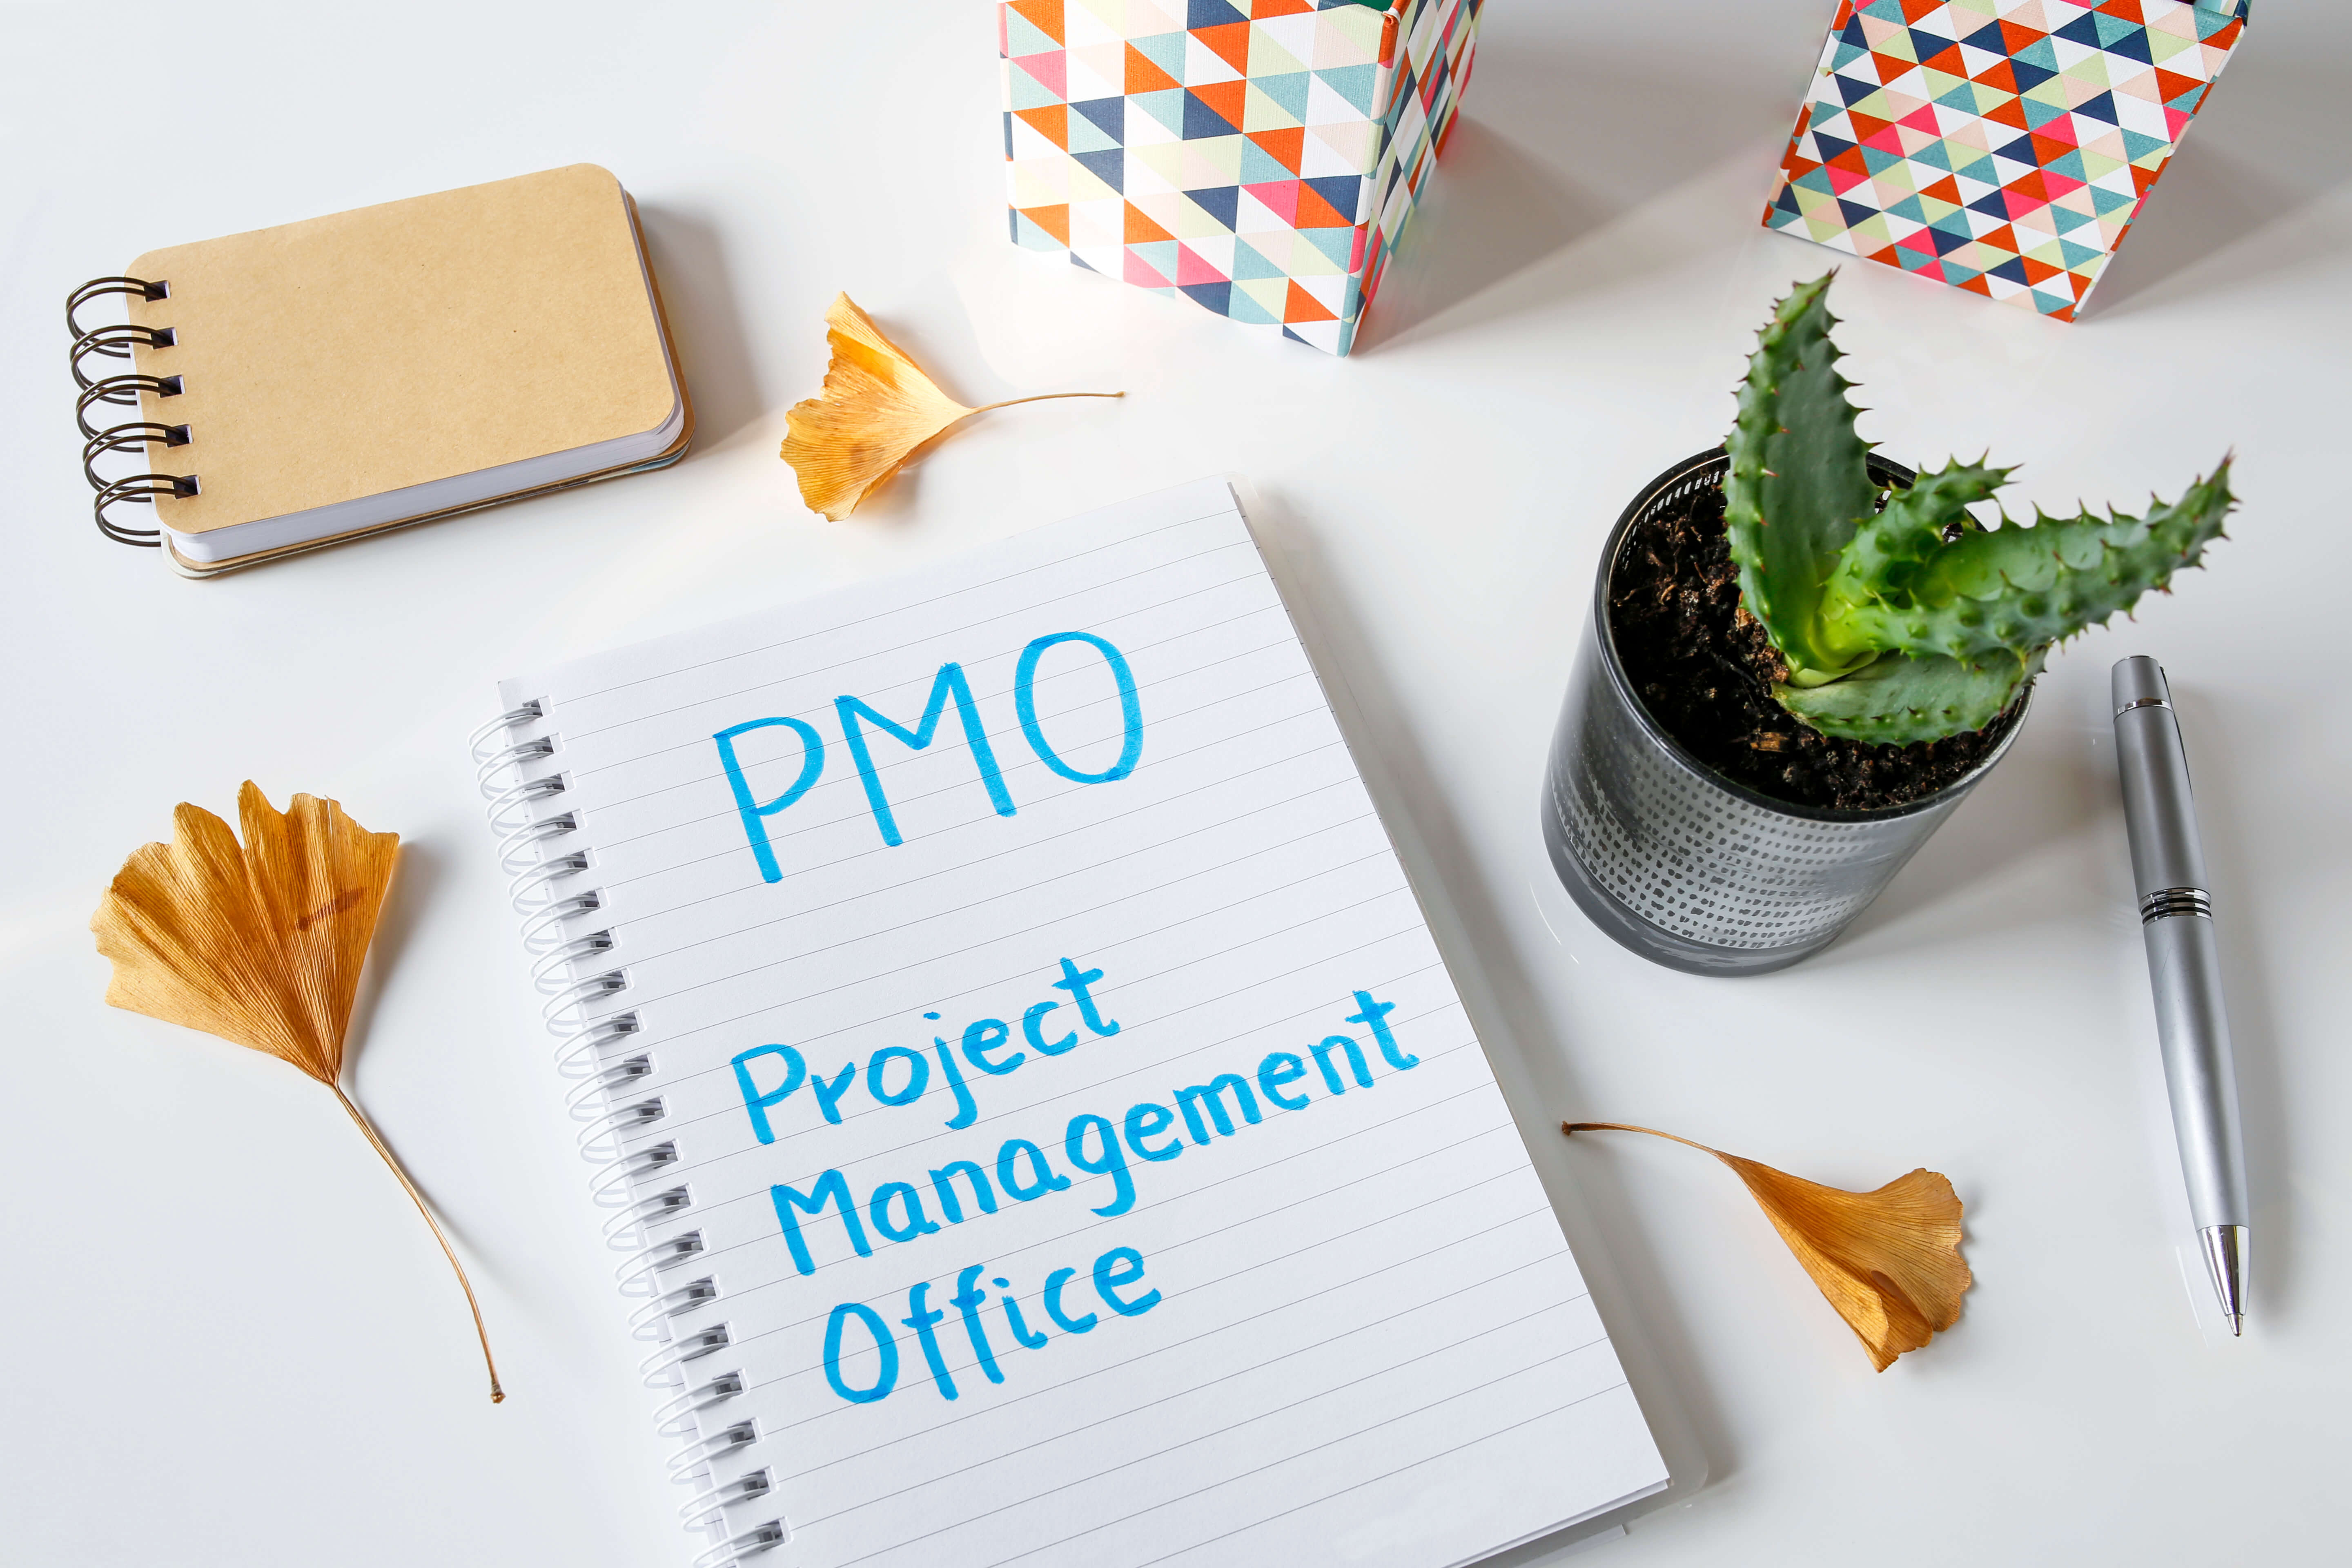 Types of PMO (Project Management Office)